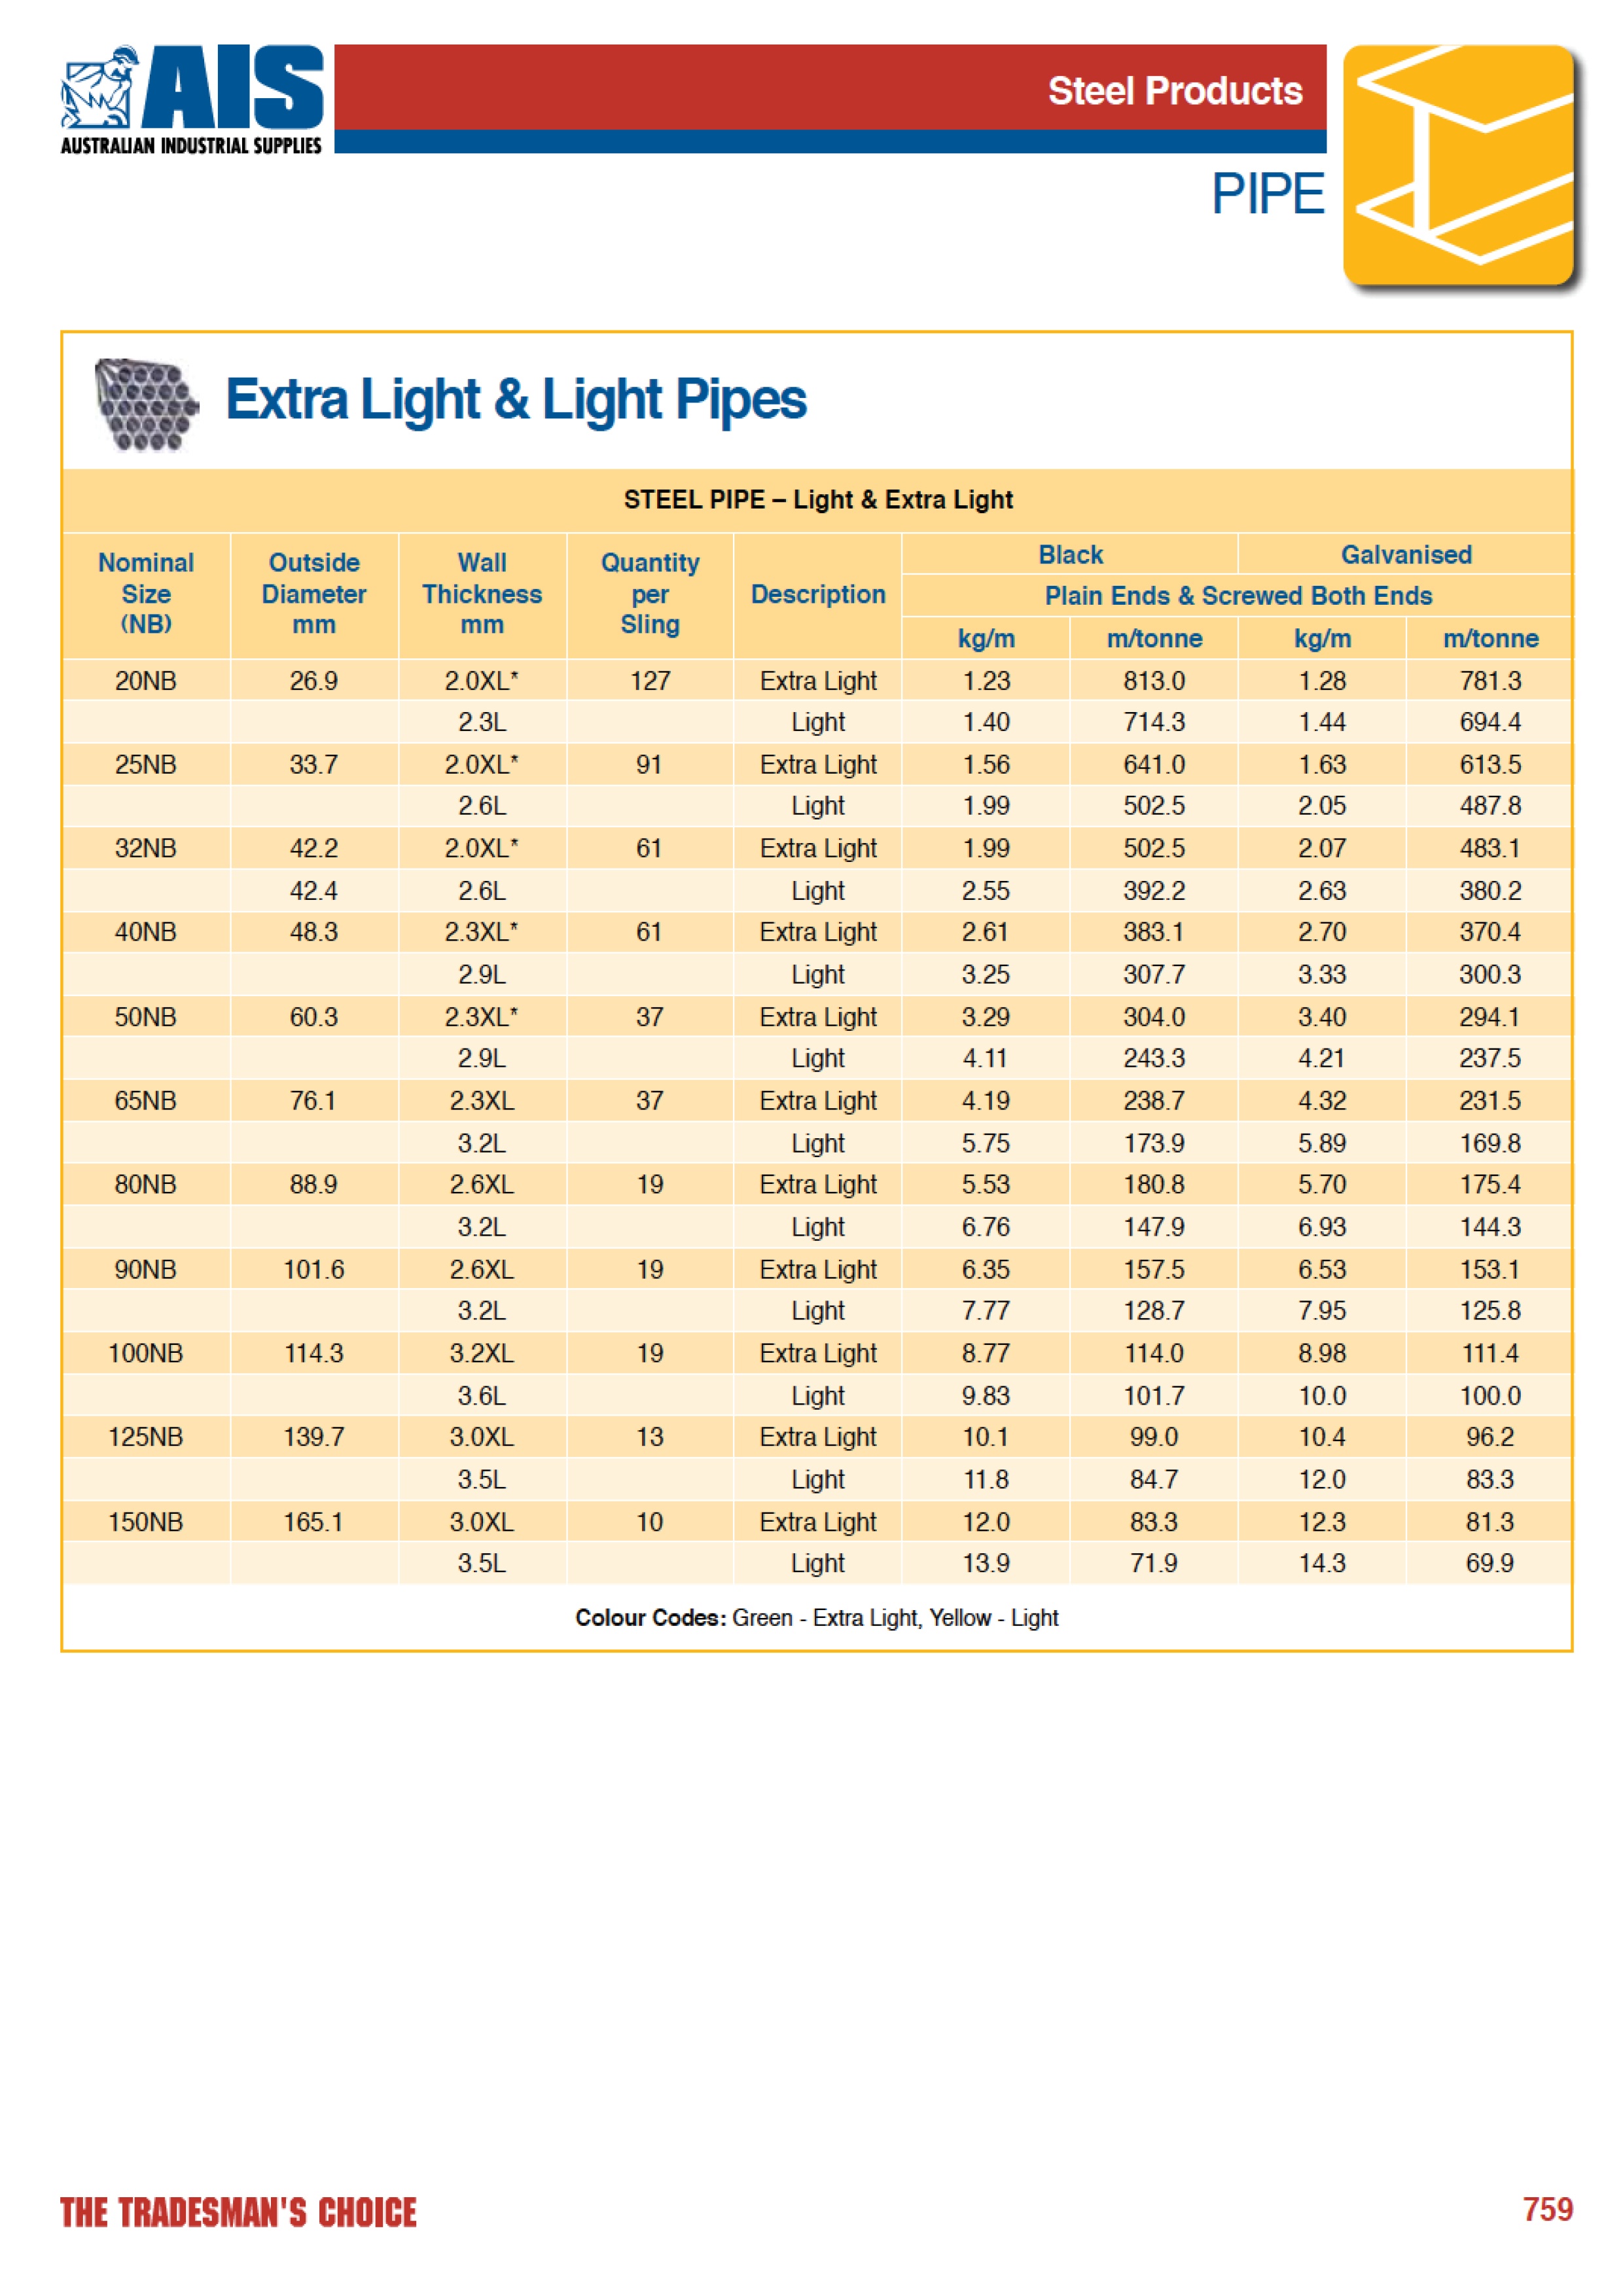 Extra Light and Light Pipes